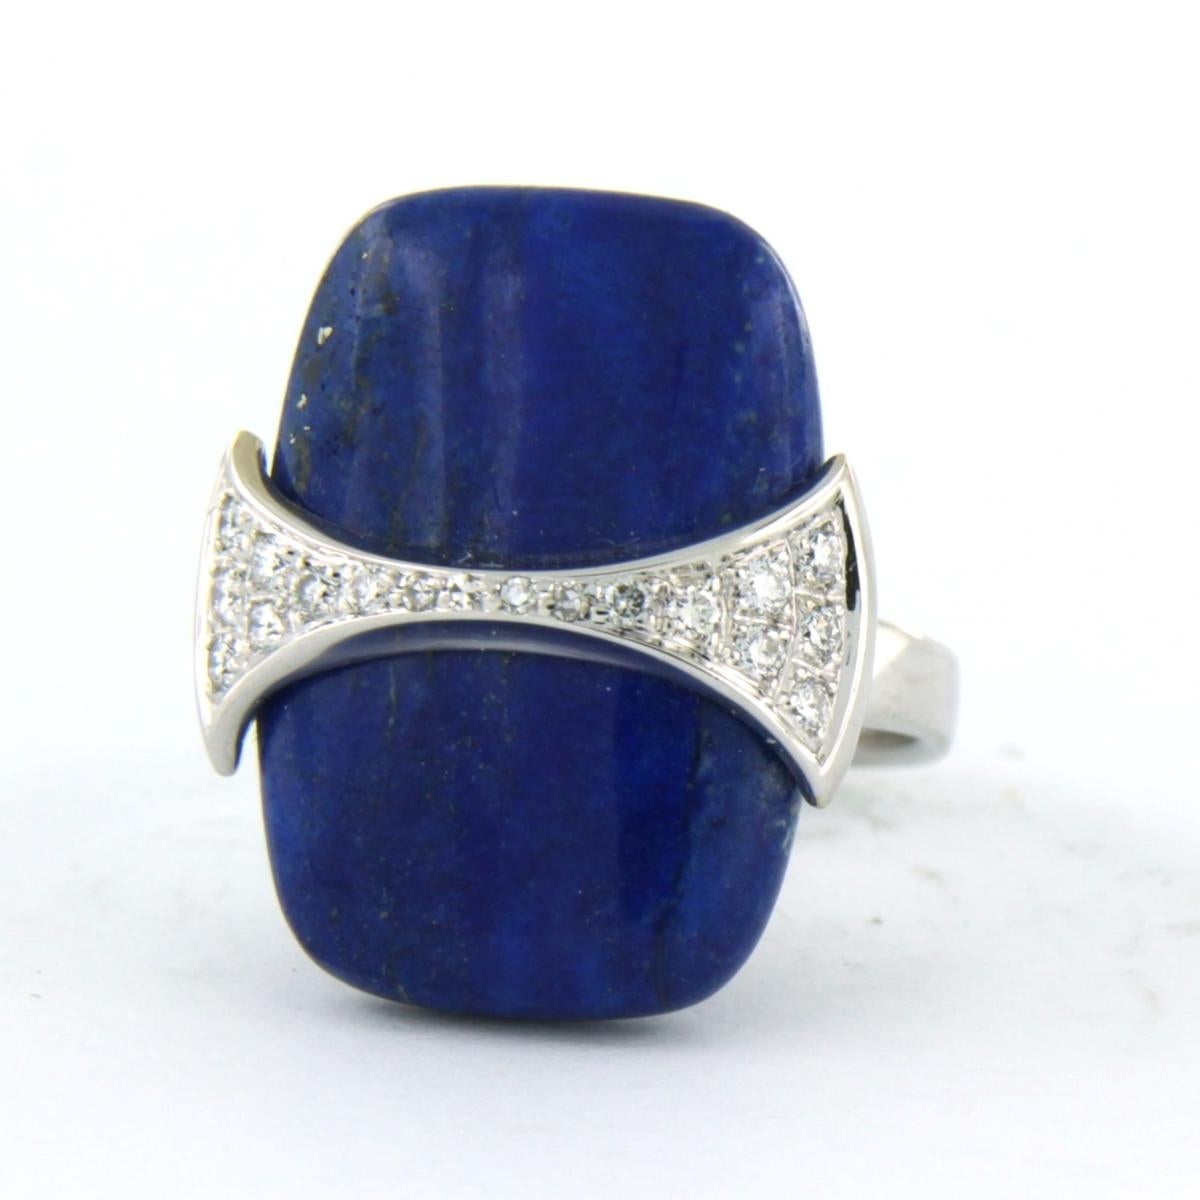 Brilliant Cut Ring with Lapis Lazuli and diamonds 14k white gold For Sale